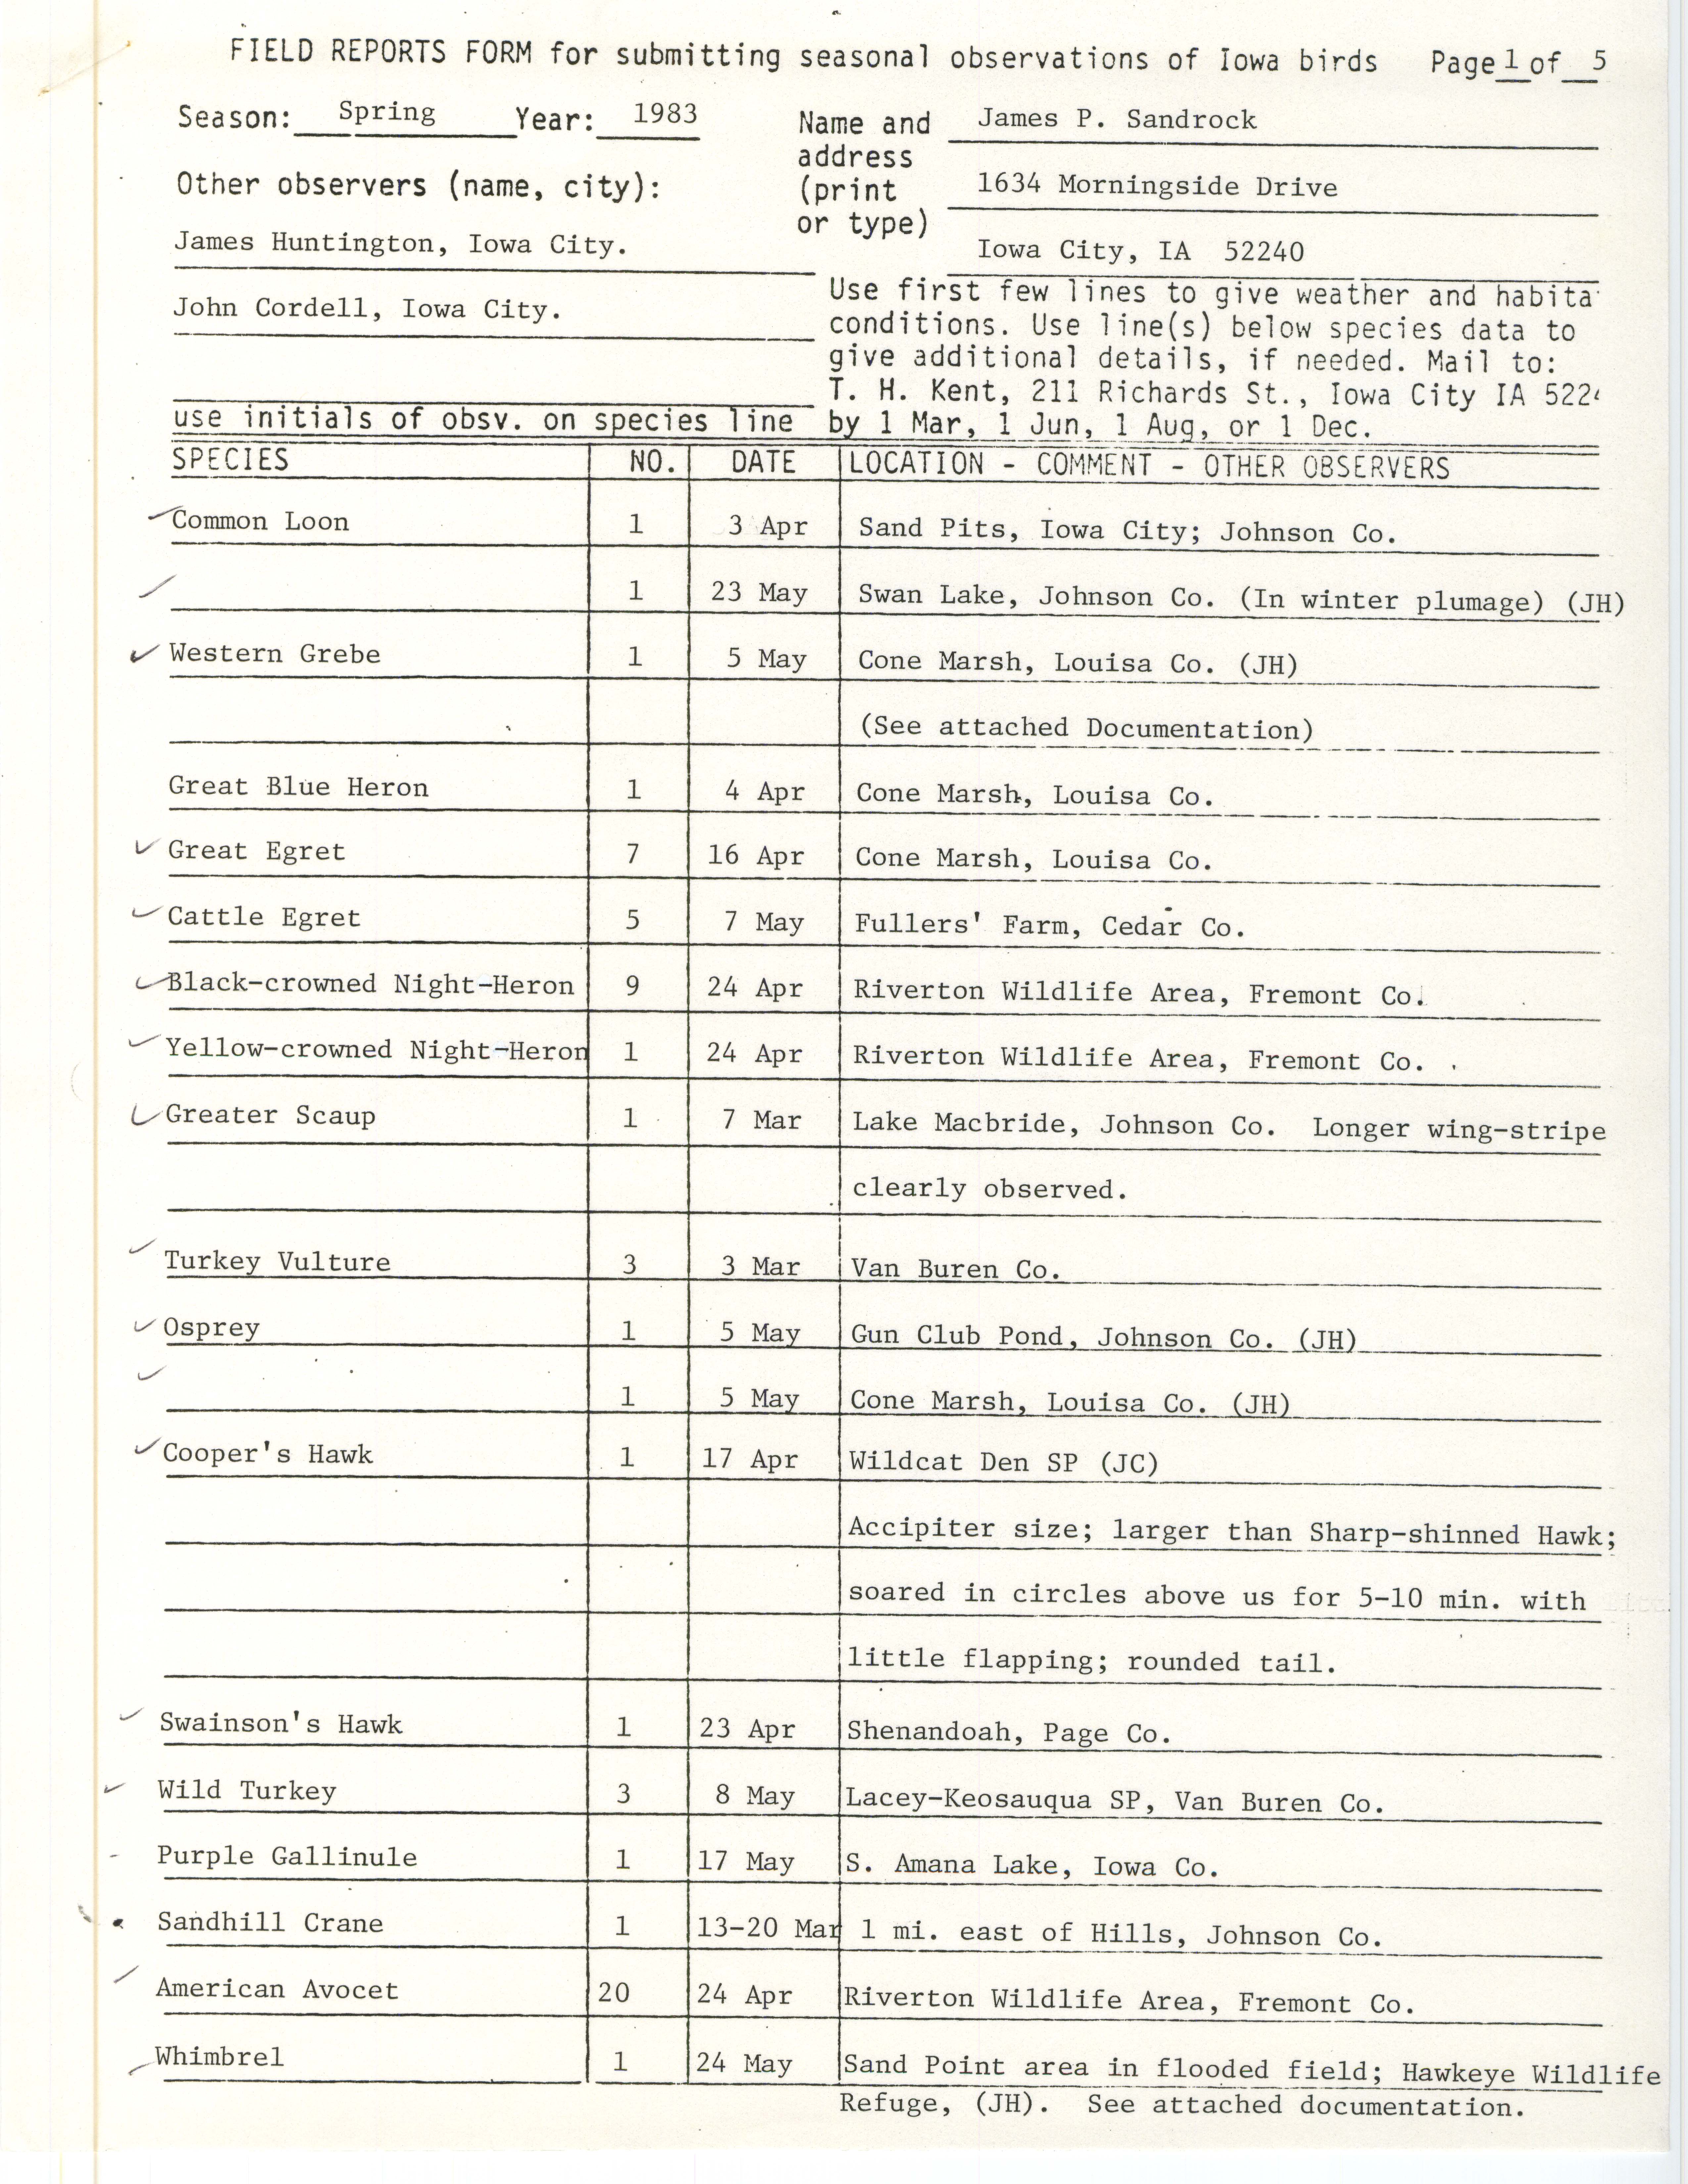 Field reports form for submitting seasonal observations of Iowa birds, James P. Sandrock, spring 1983